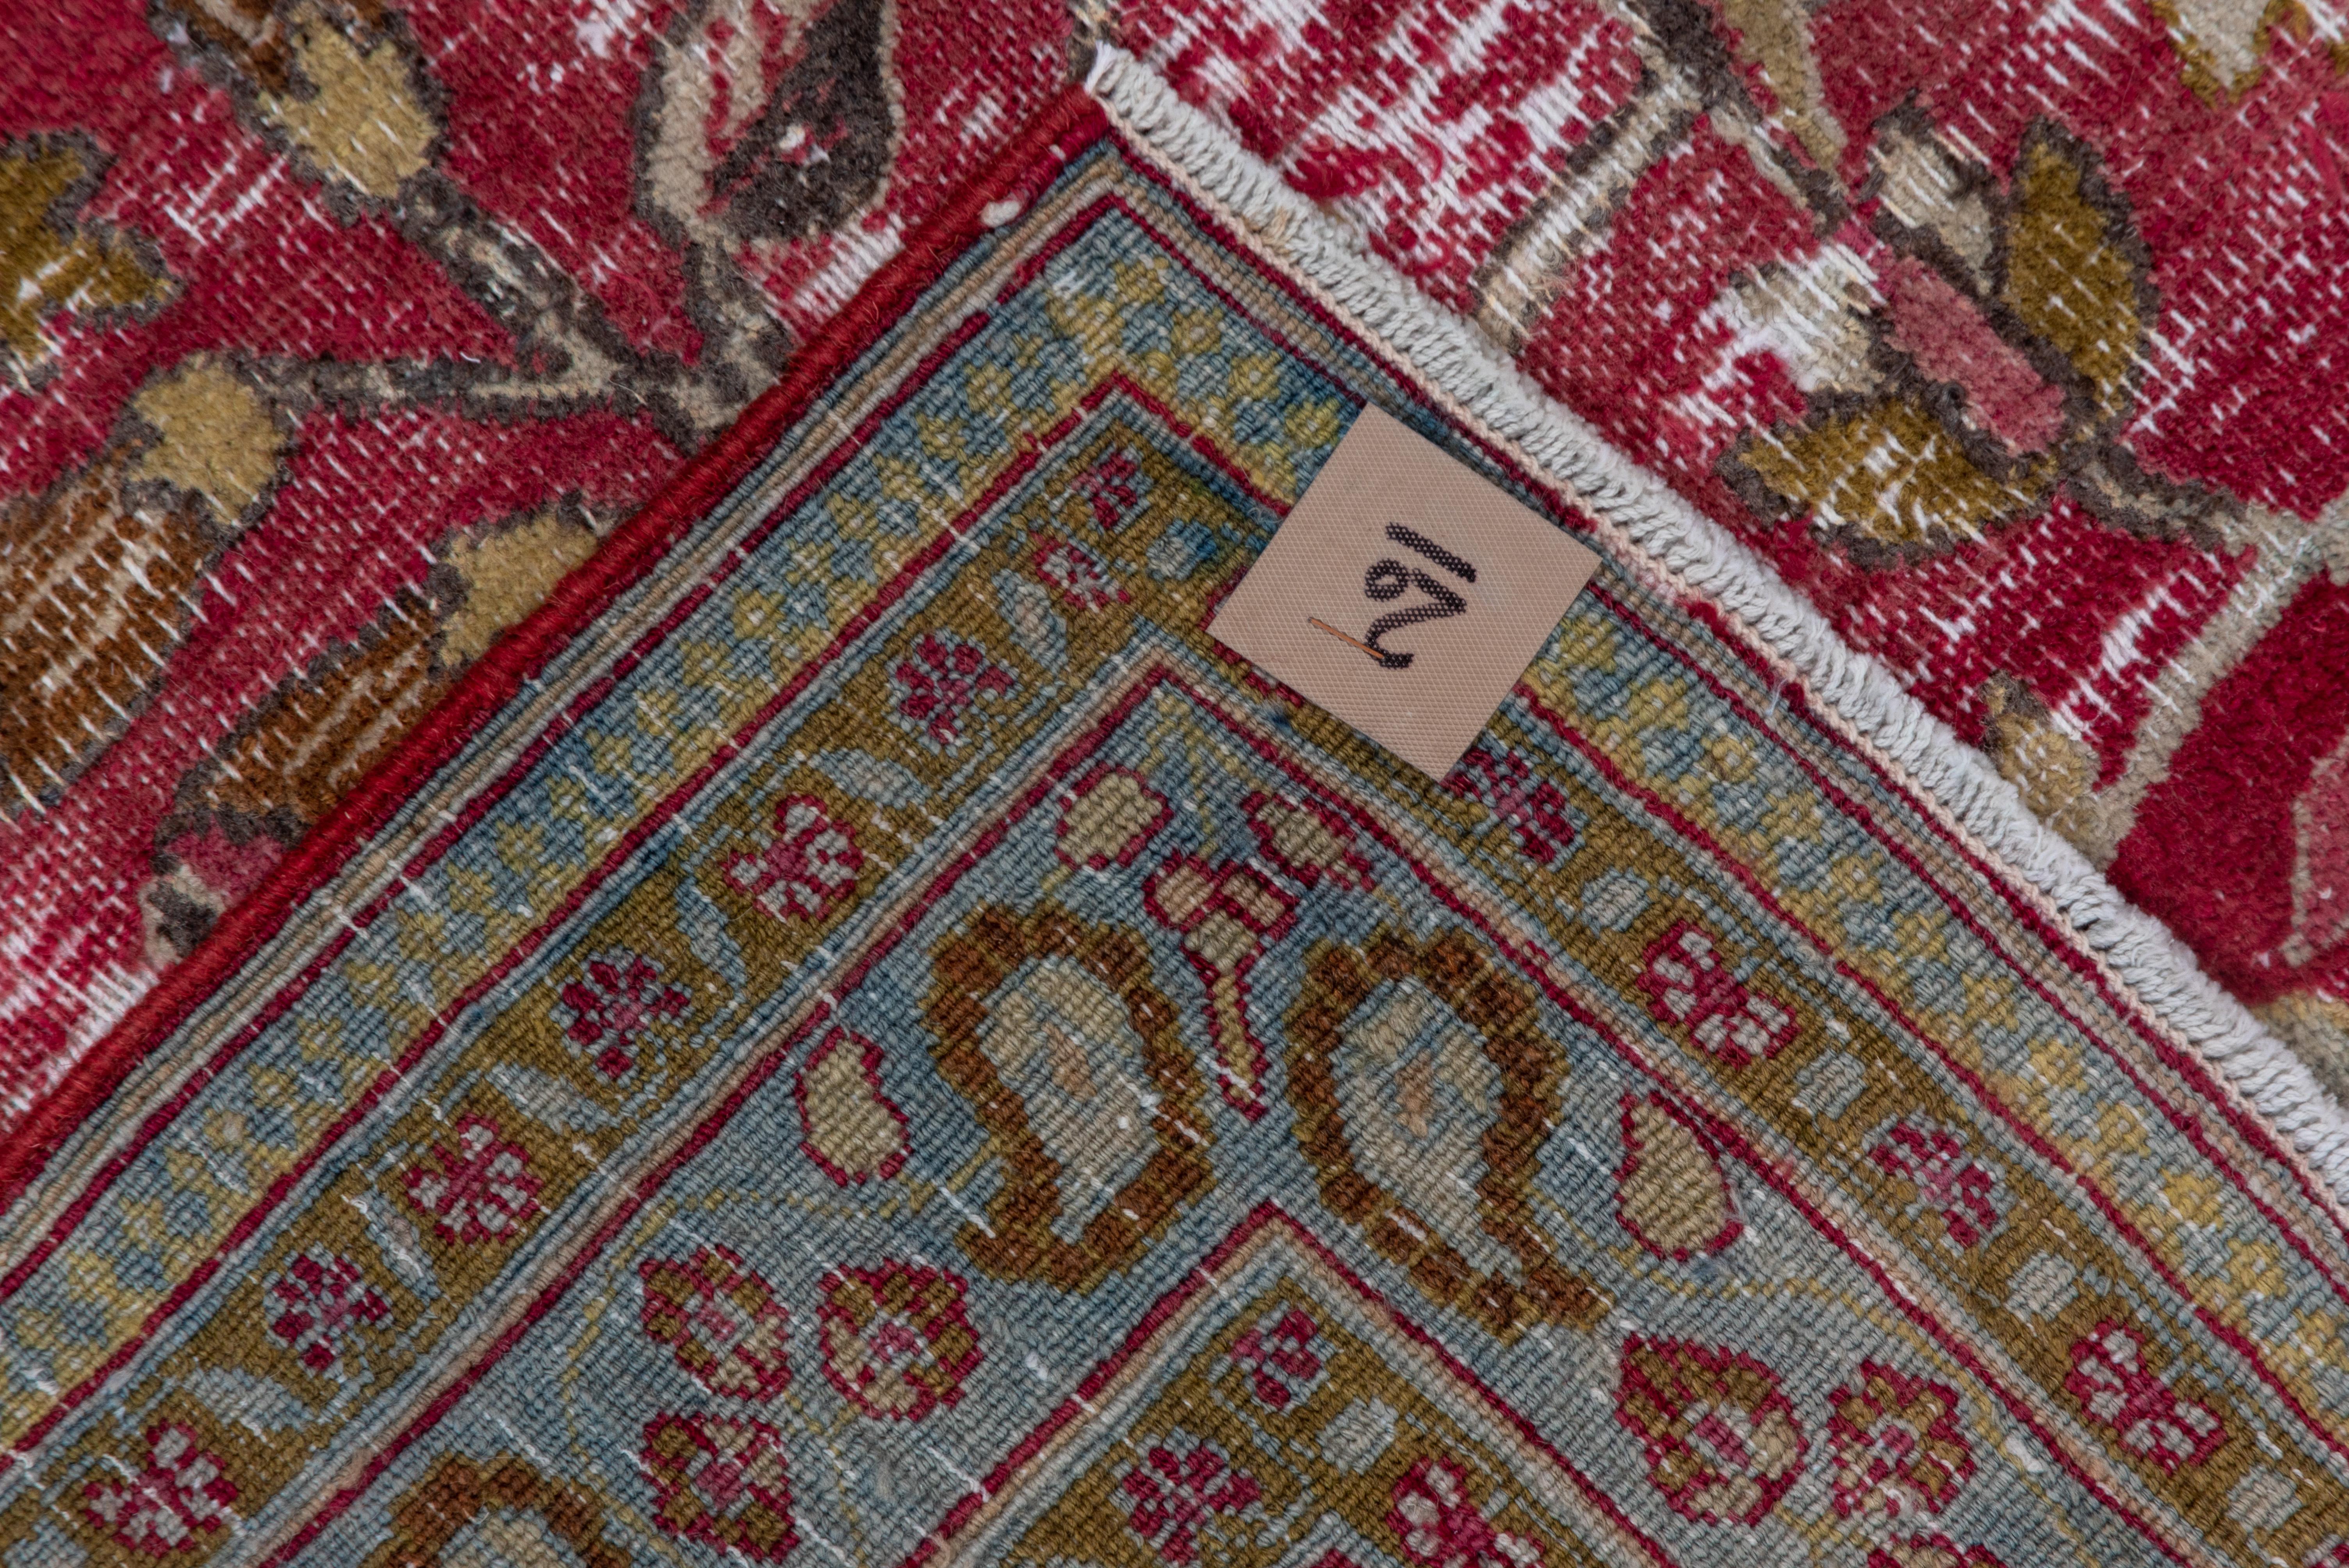 Hand-Knotted Shabby Chic Persian Khorassan Rug, Raspberry Field, Seafoam & Olive Borders For Sale